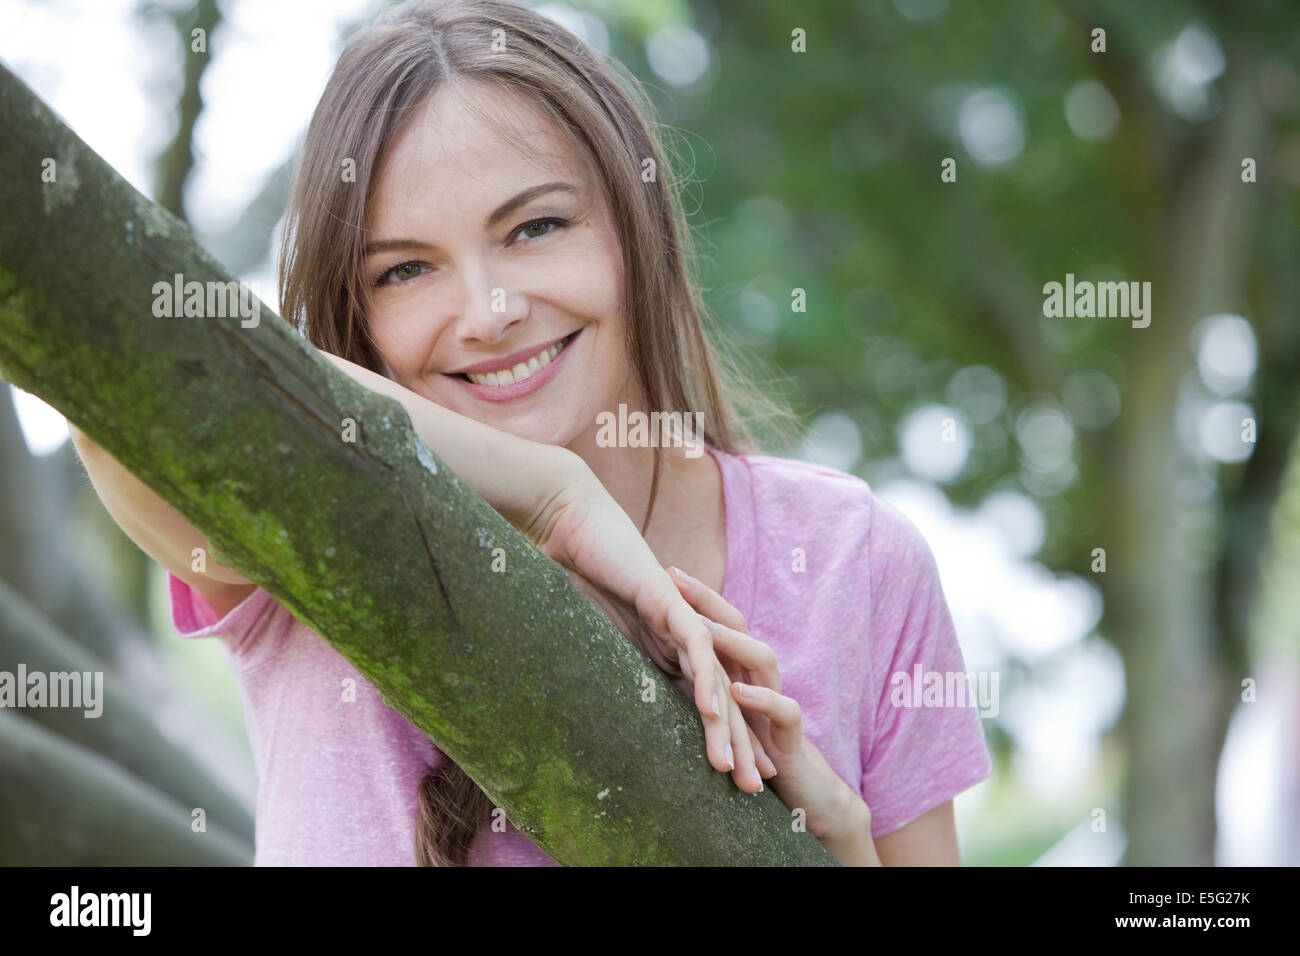 Portrait of a woman at a tree Stock Photo